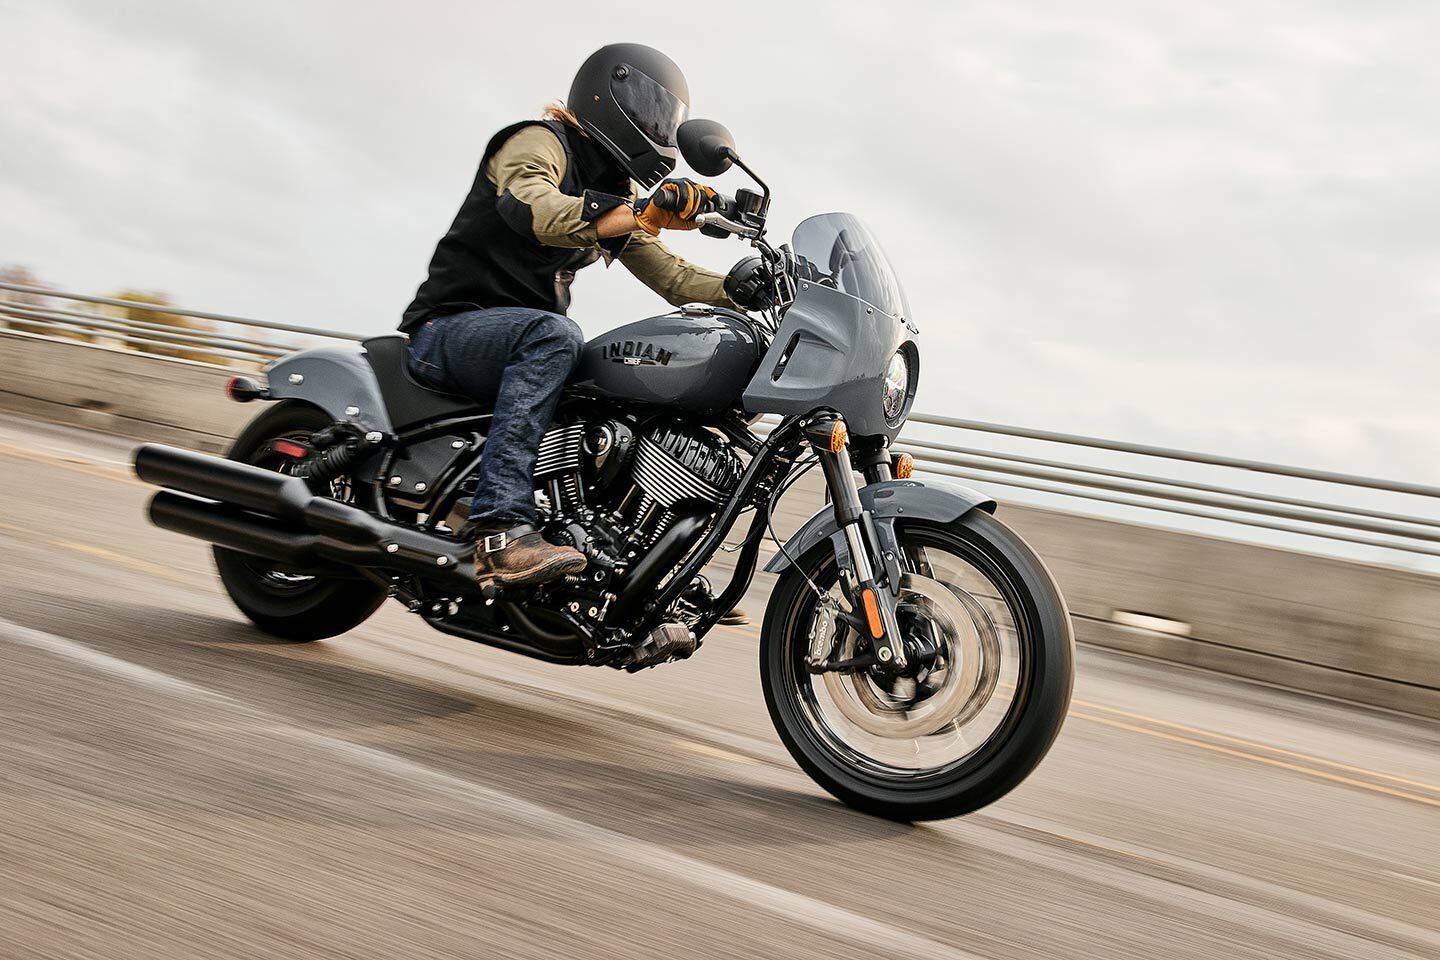 Take a laid-back ride to somewhere far away on the new Indian Sport Chief.